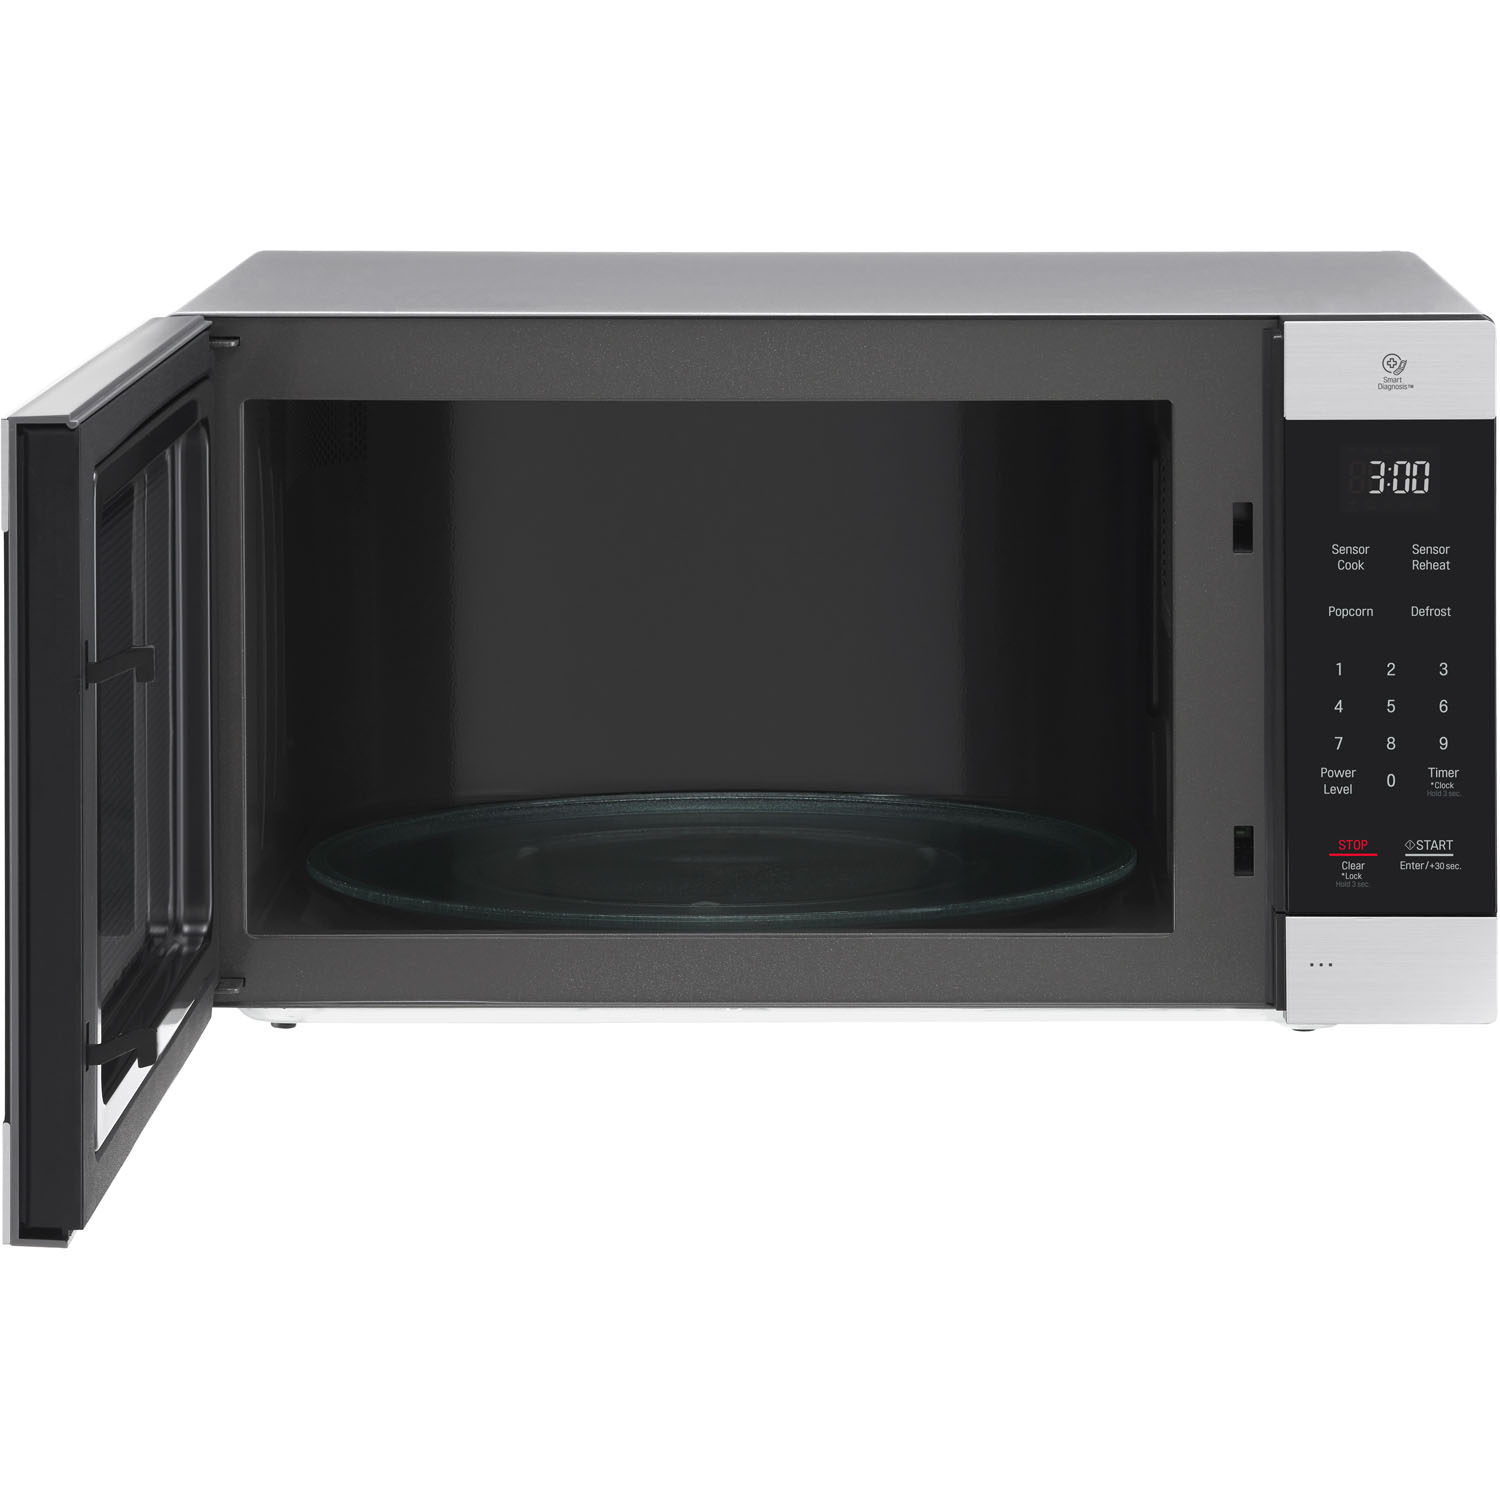 LG NeoChef 2.0 Cu. Ft. 1200W Countertop Microwave - image 4 of 7